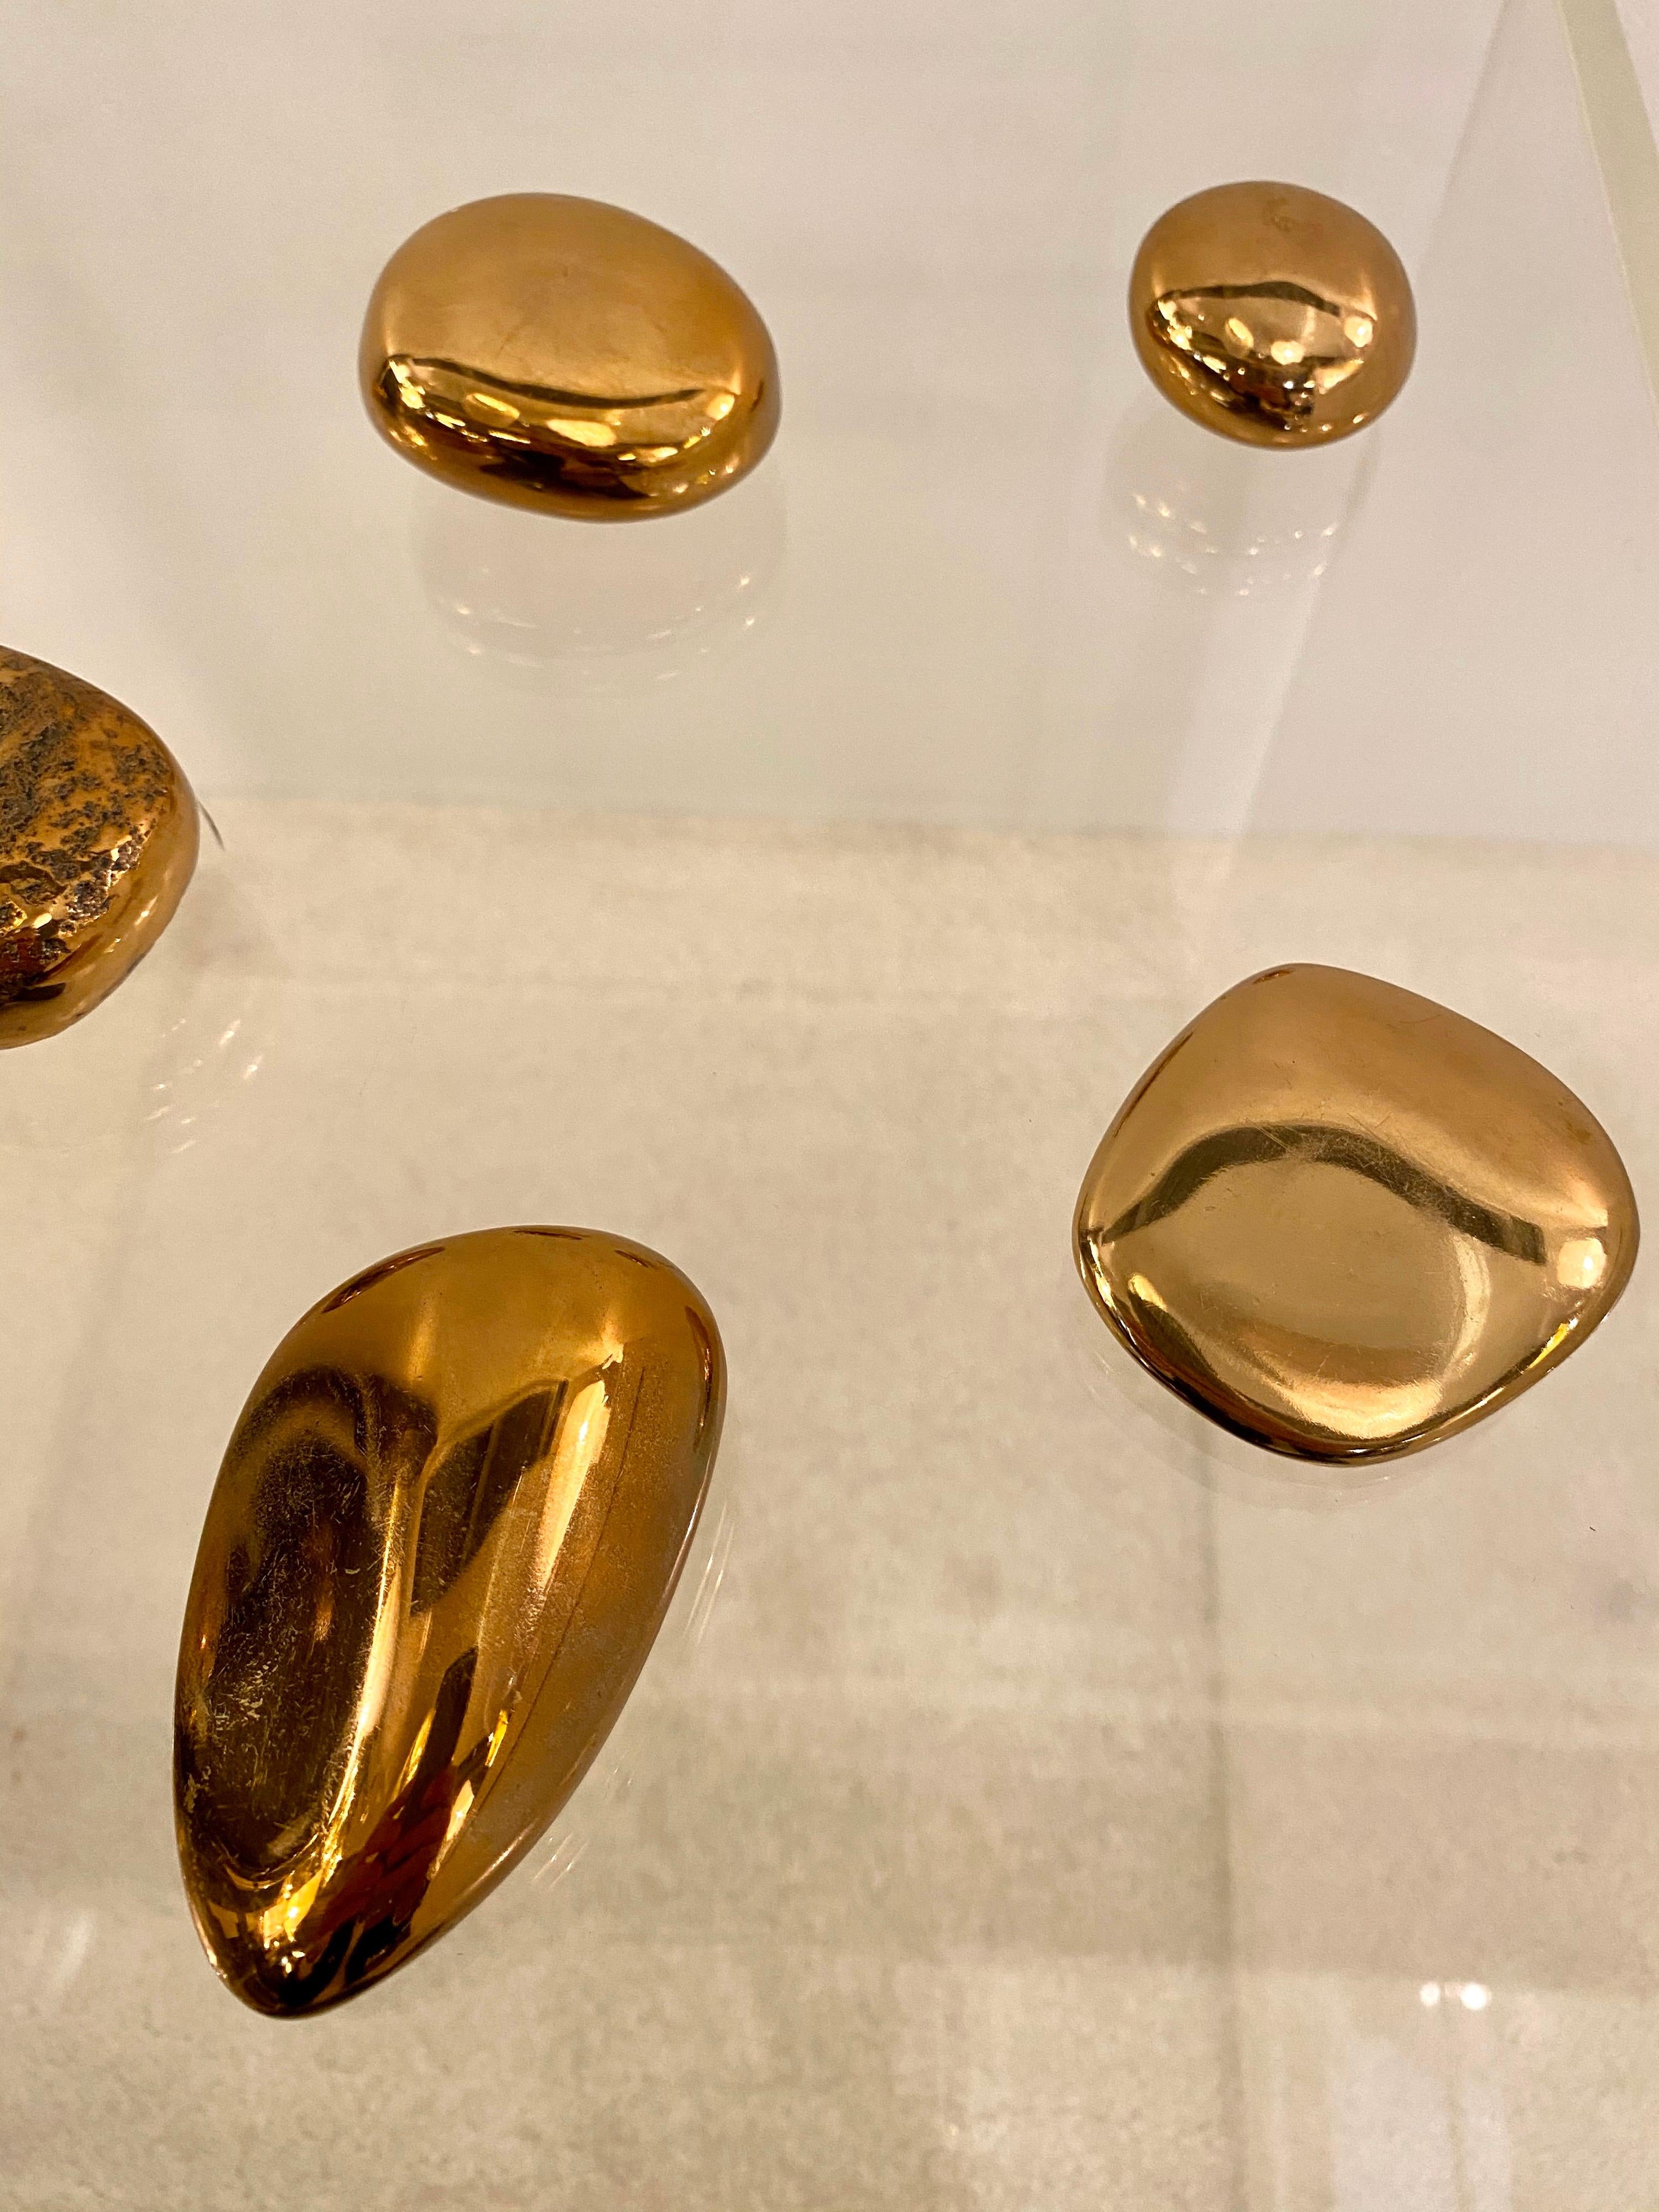 These seven solid bronze Peebles have been created by French sculptor, Monique Gerber in 1970.
This gift of the sea (as she called them!) can be useful as paperweights or be displayed on a table for decoration.
Smooth, heavy, brush gold finished,